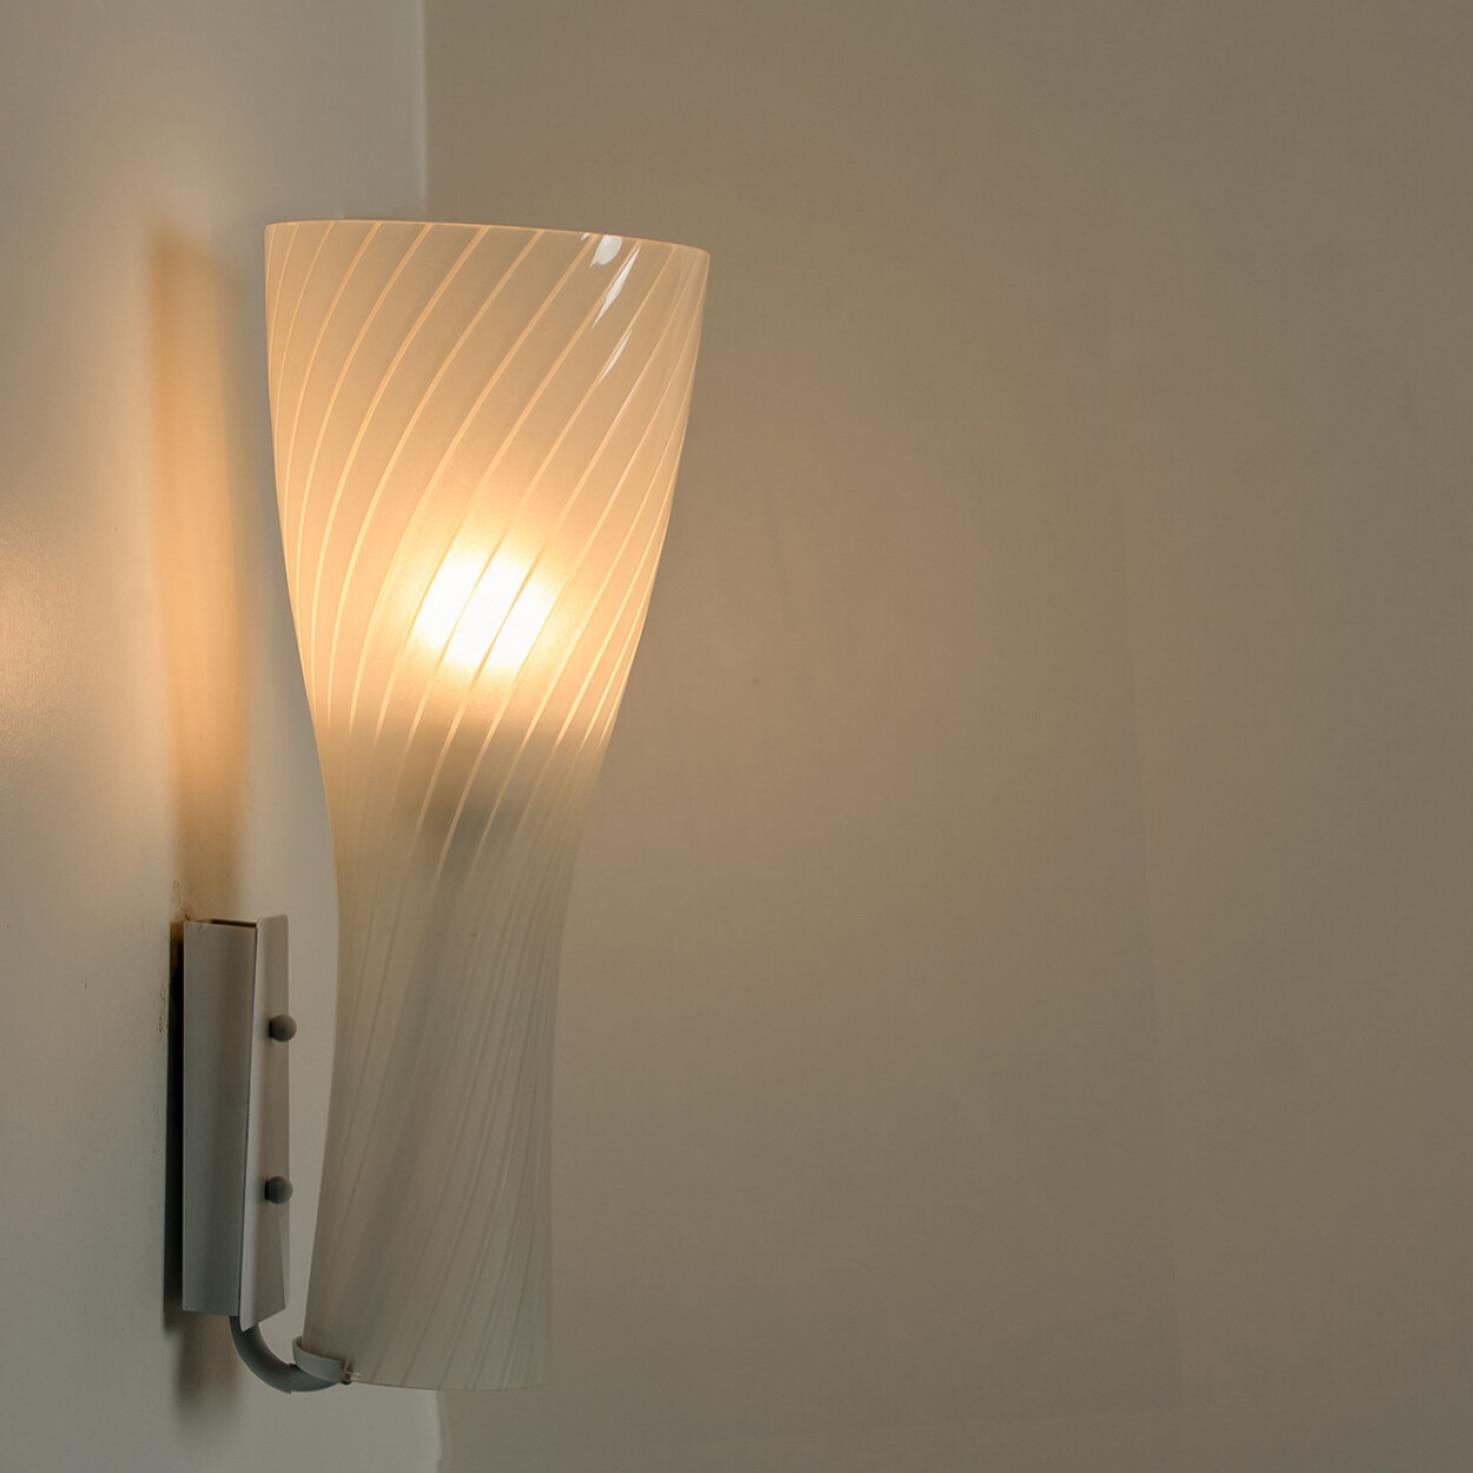 1 of 6 Striped Clear White Glass Wall Lights by Gangkofner for Peill, Germany For Sale 3